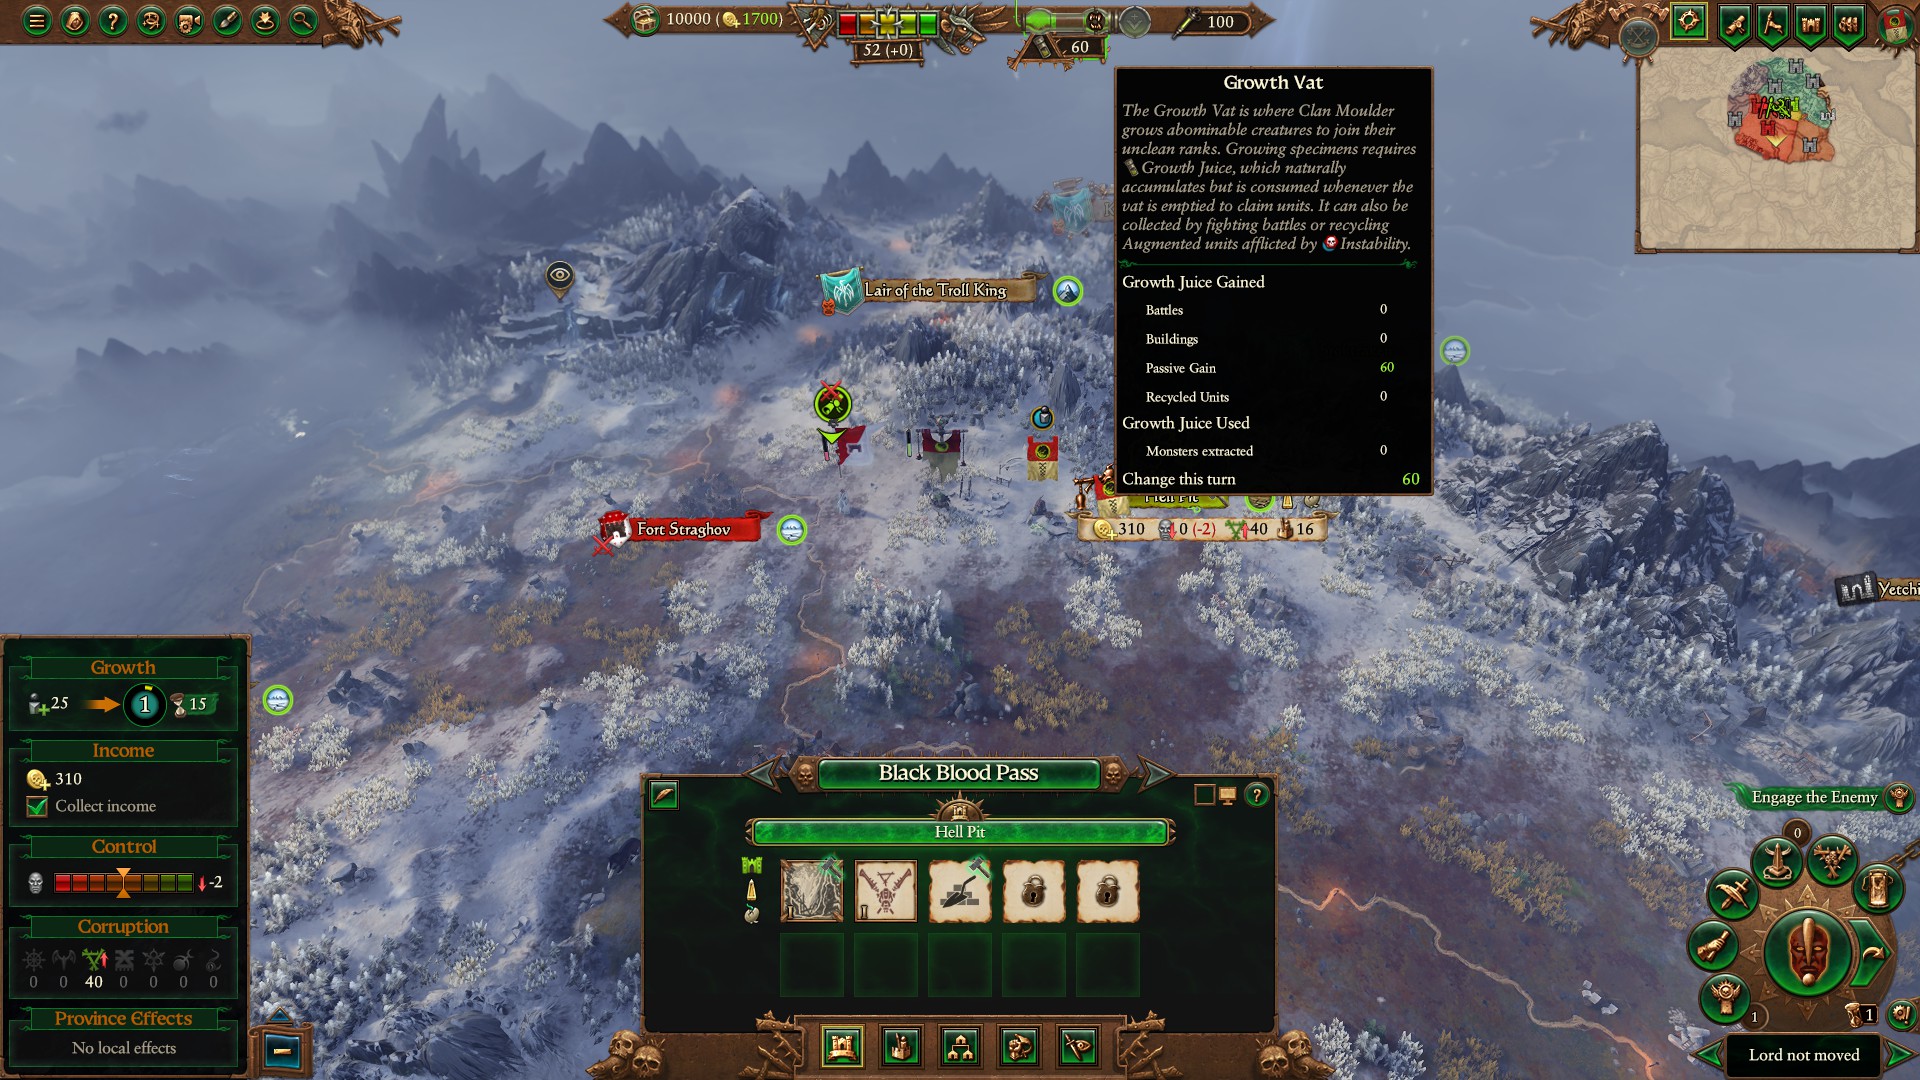 Total War: Warhammer 3 Immortal Empires Throt - Skaven campaign overview, guide and second thoughts image 5